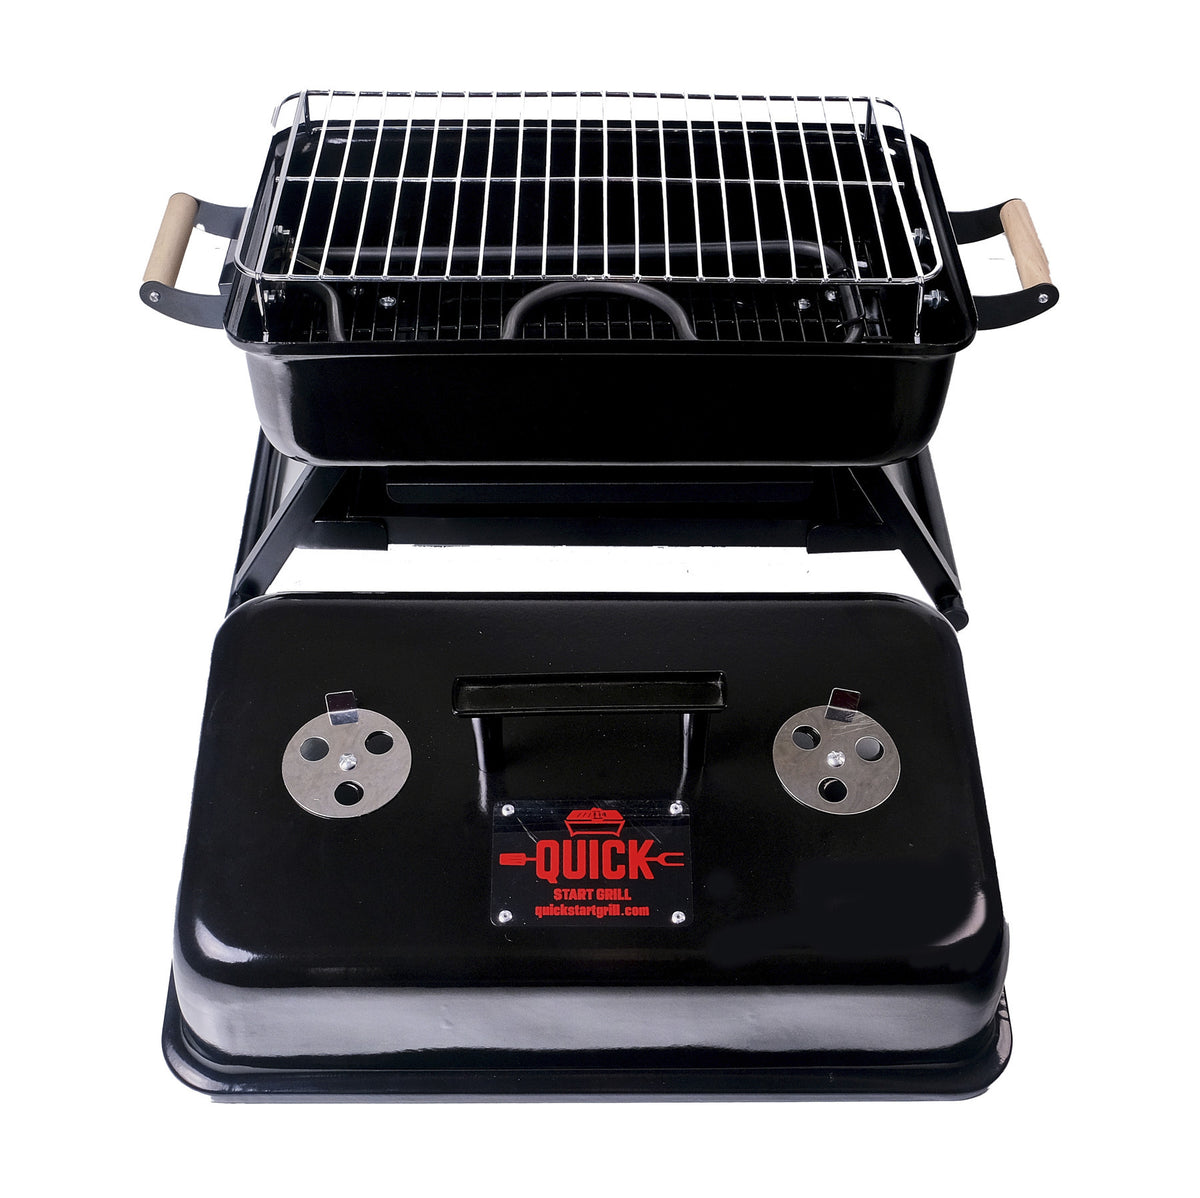 Best Tabletop Charcoal Grill Online - Quick Start